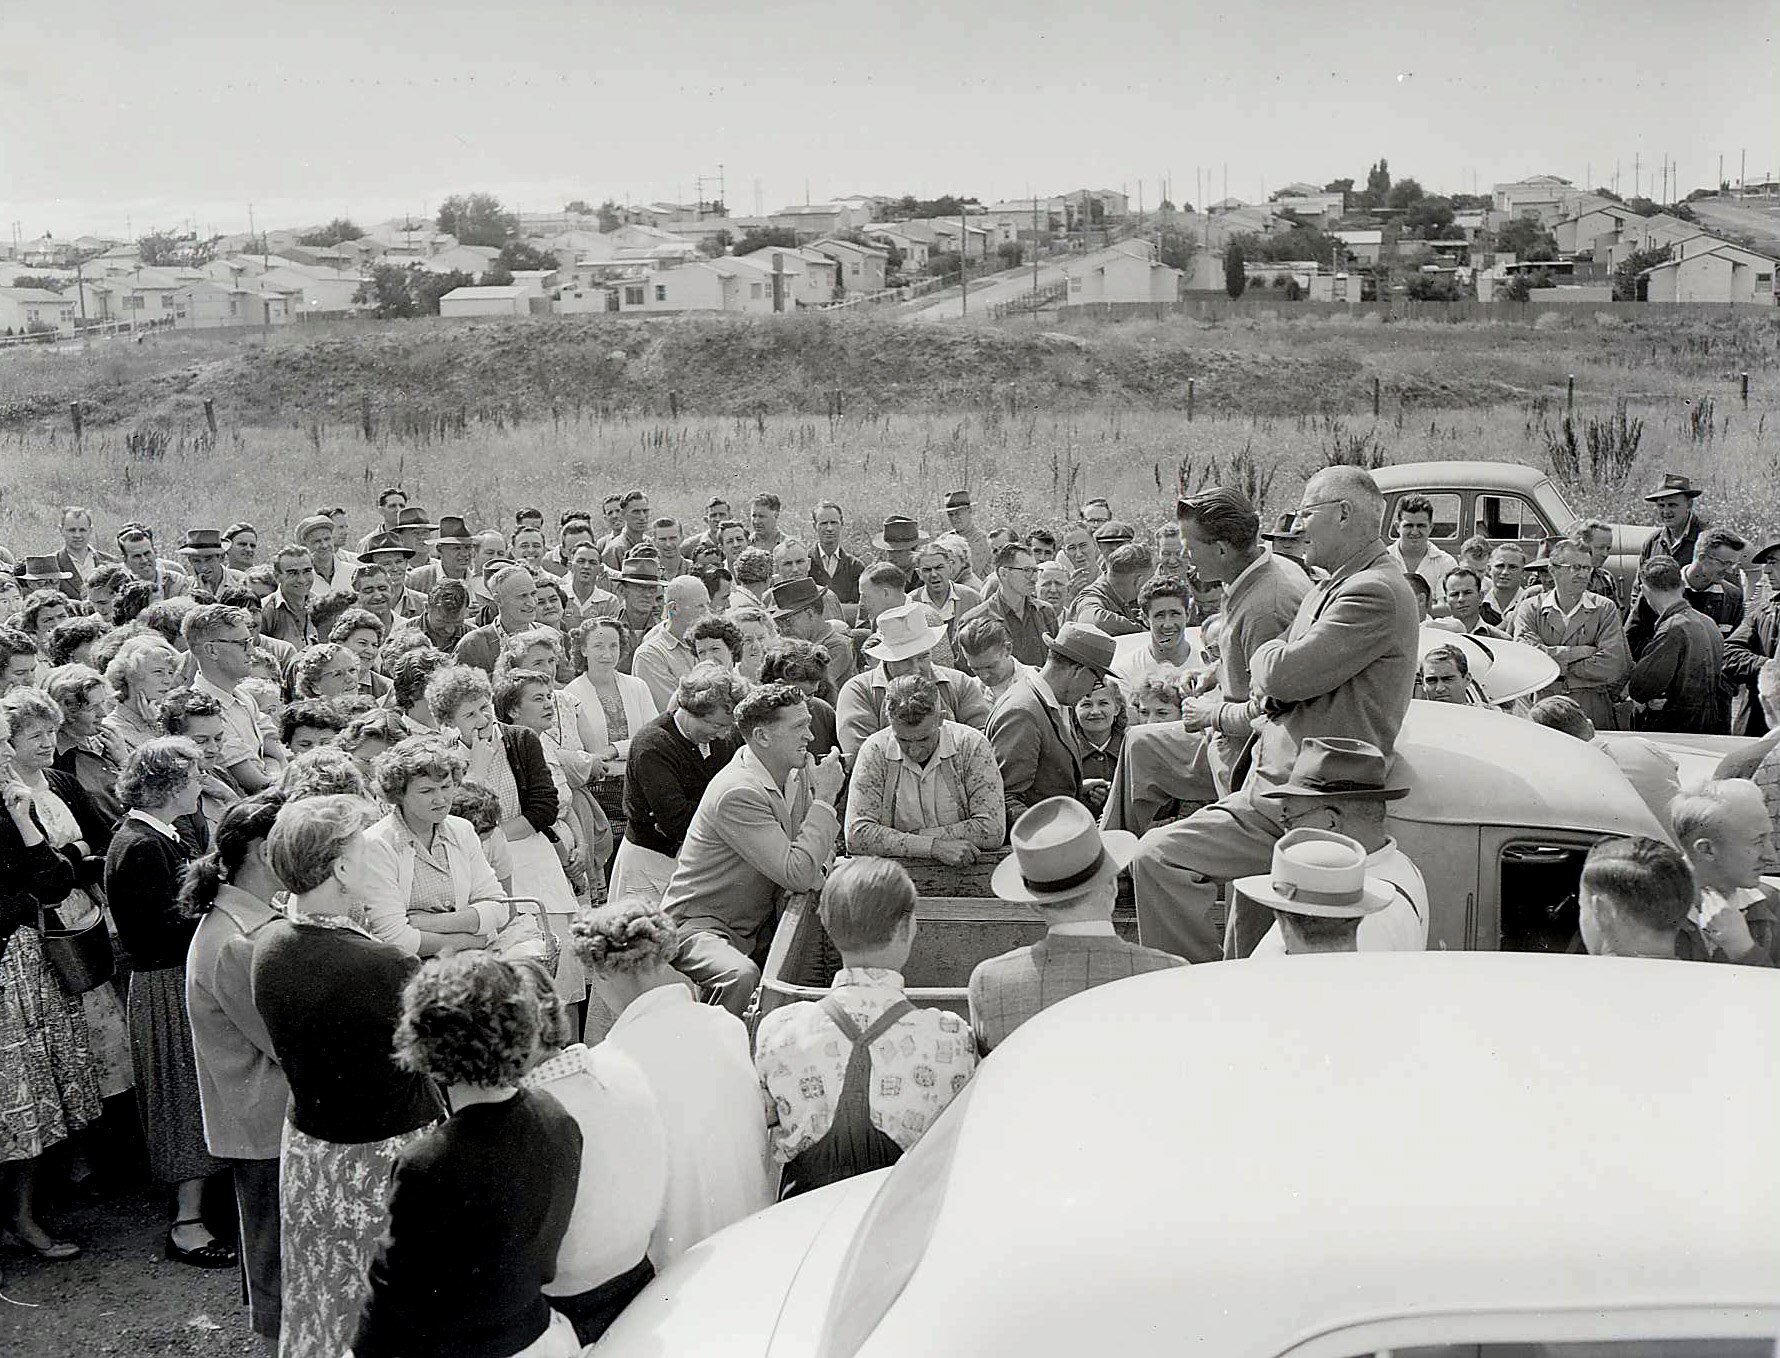 A black and white photograph of people in a paddock some standing, others sitting on the back of a truck